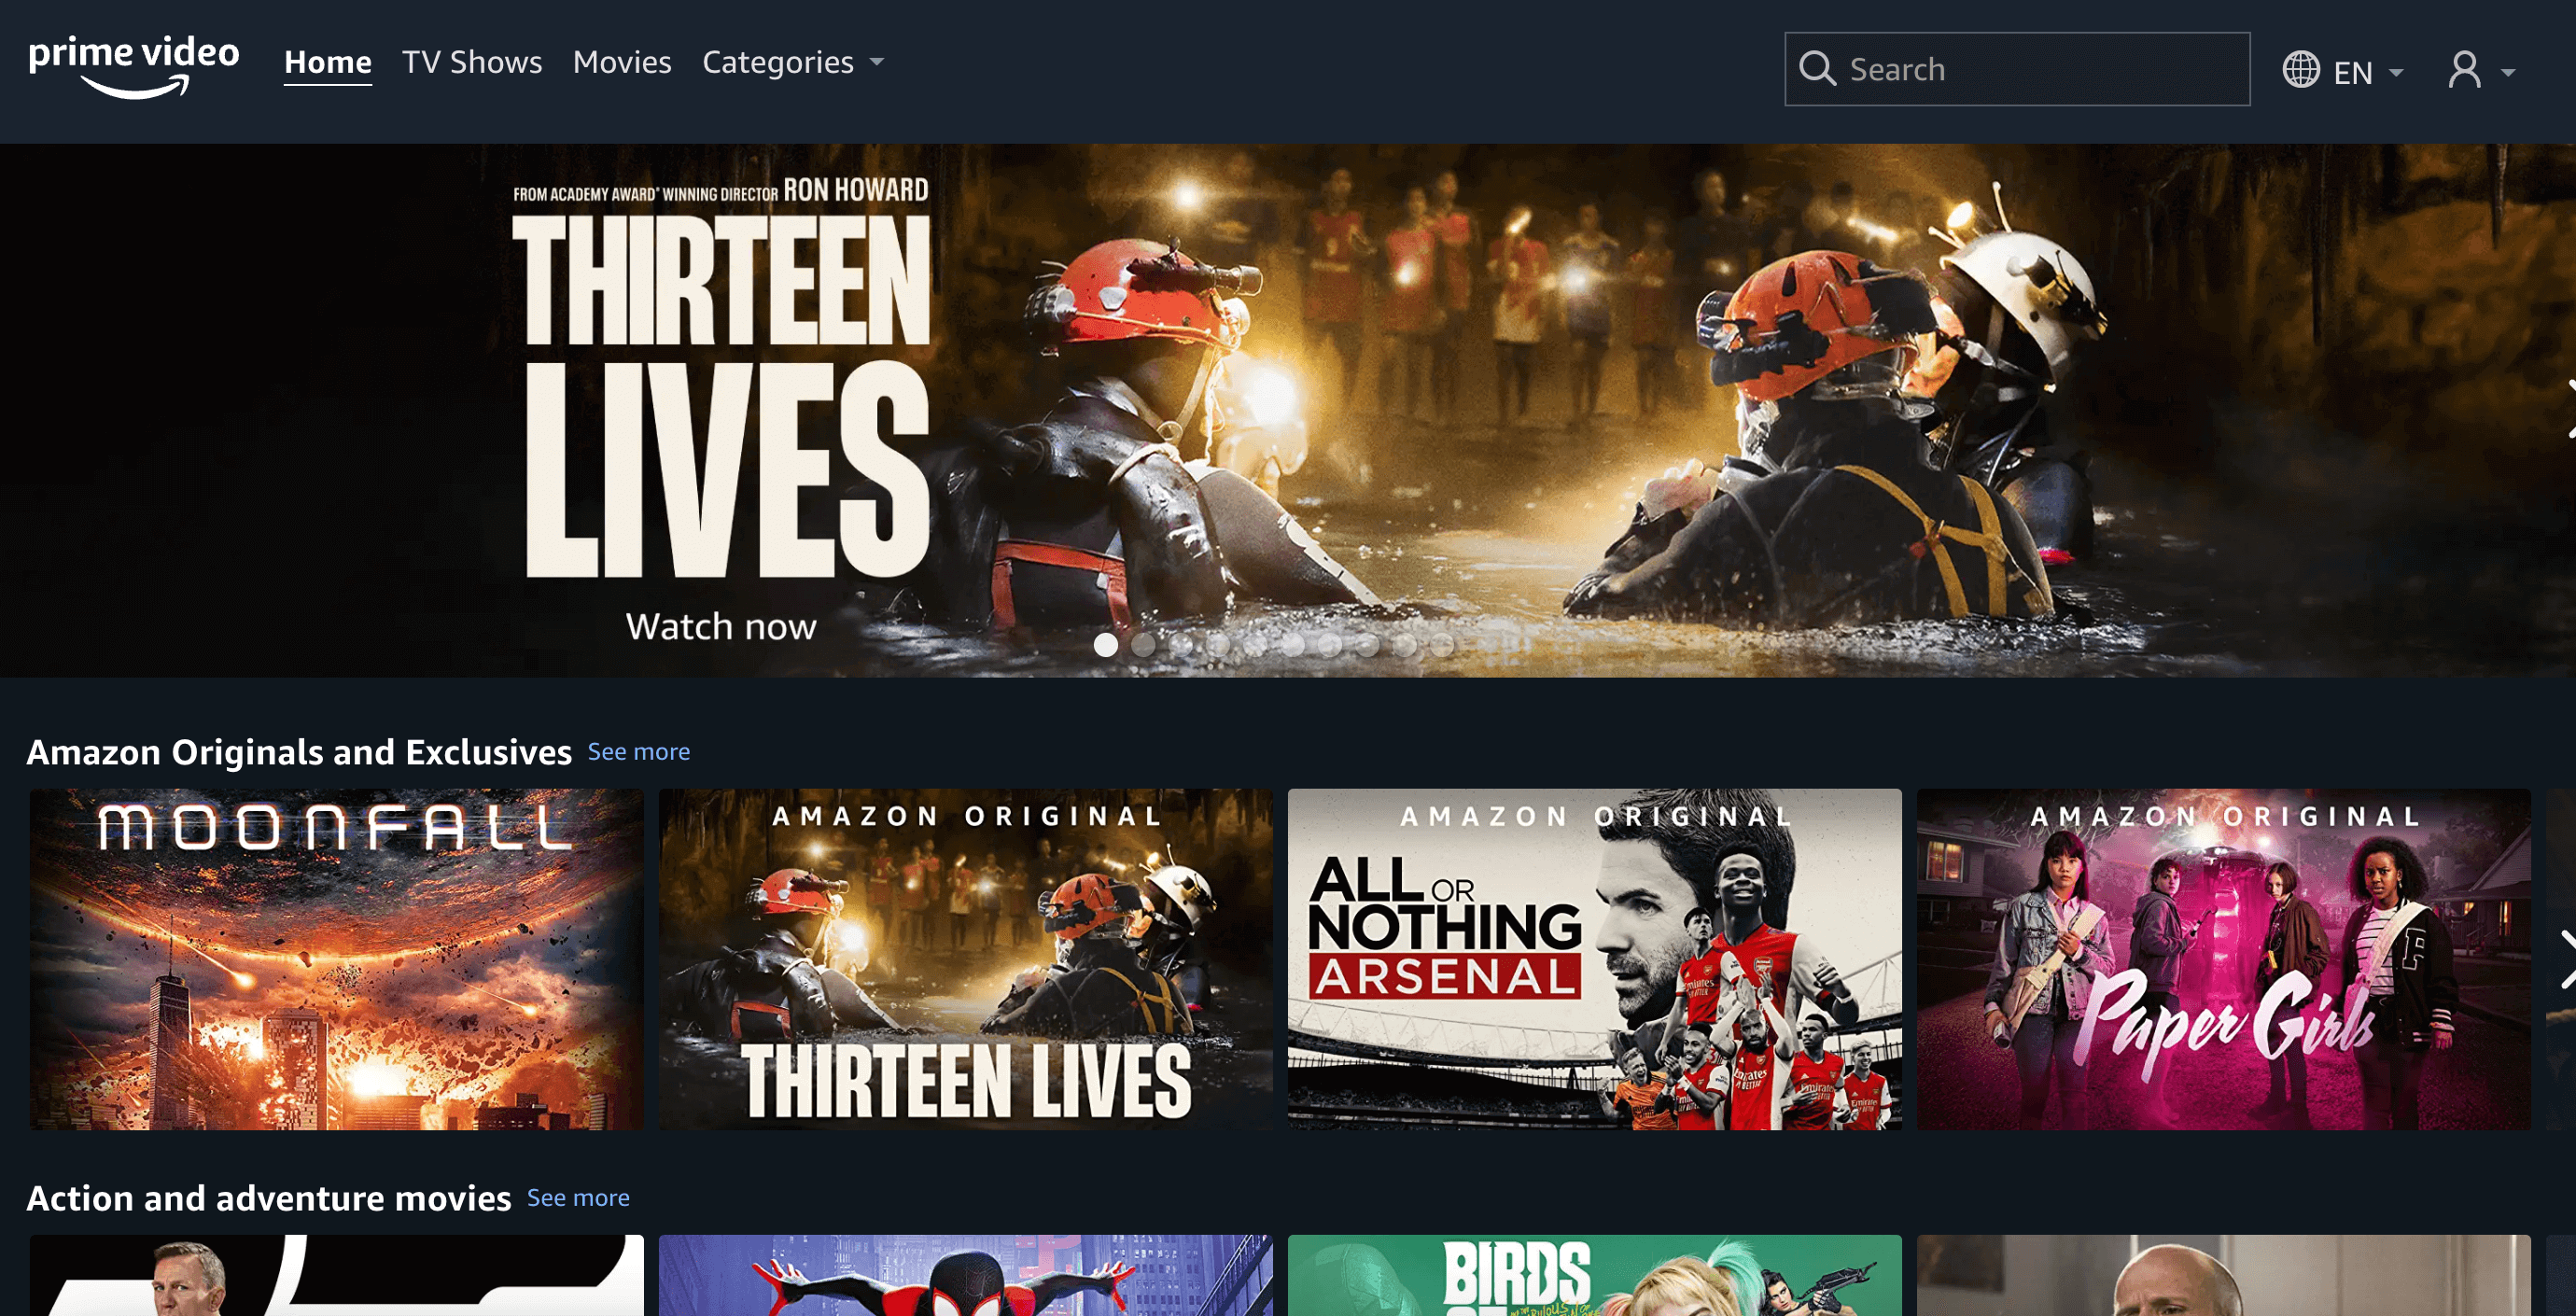 From bad to good UX: Amazon Prime Video